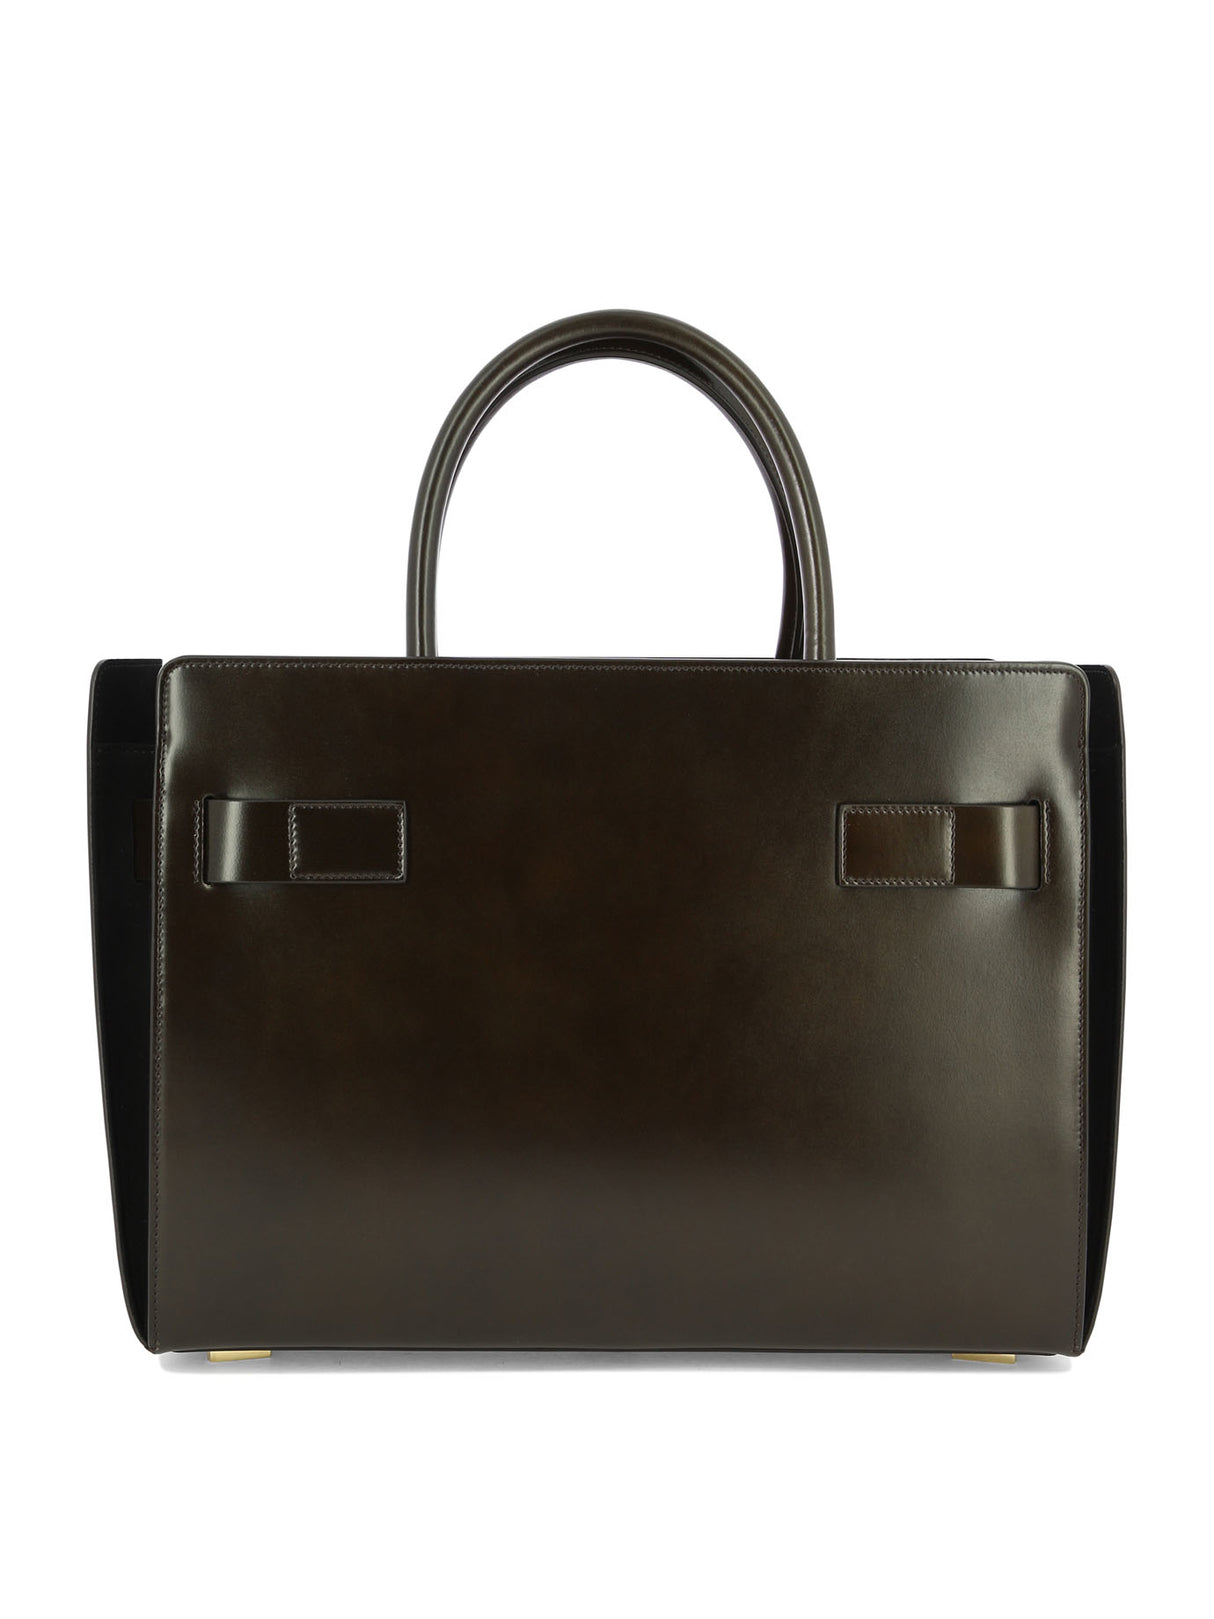 FERRAGAMO Brown Tote Handbag with Removable Shoulder Strap for Women - FW23 Collection